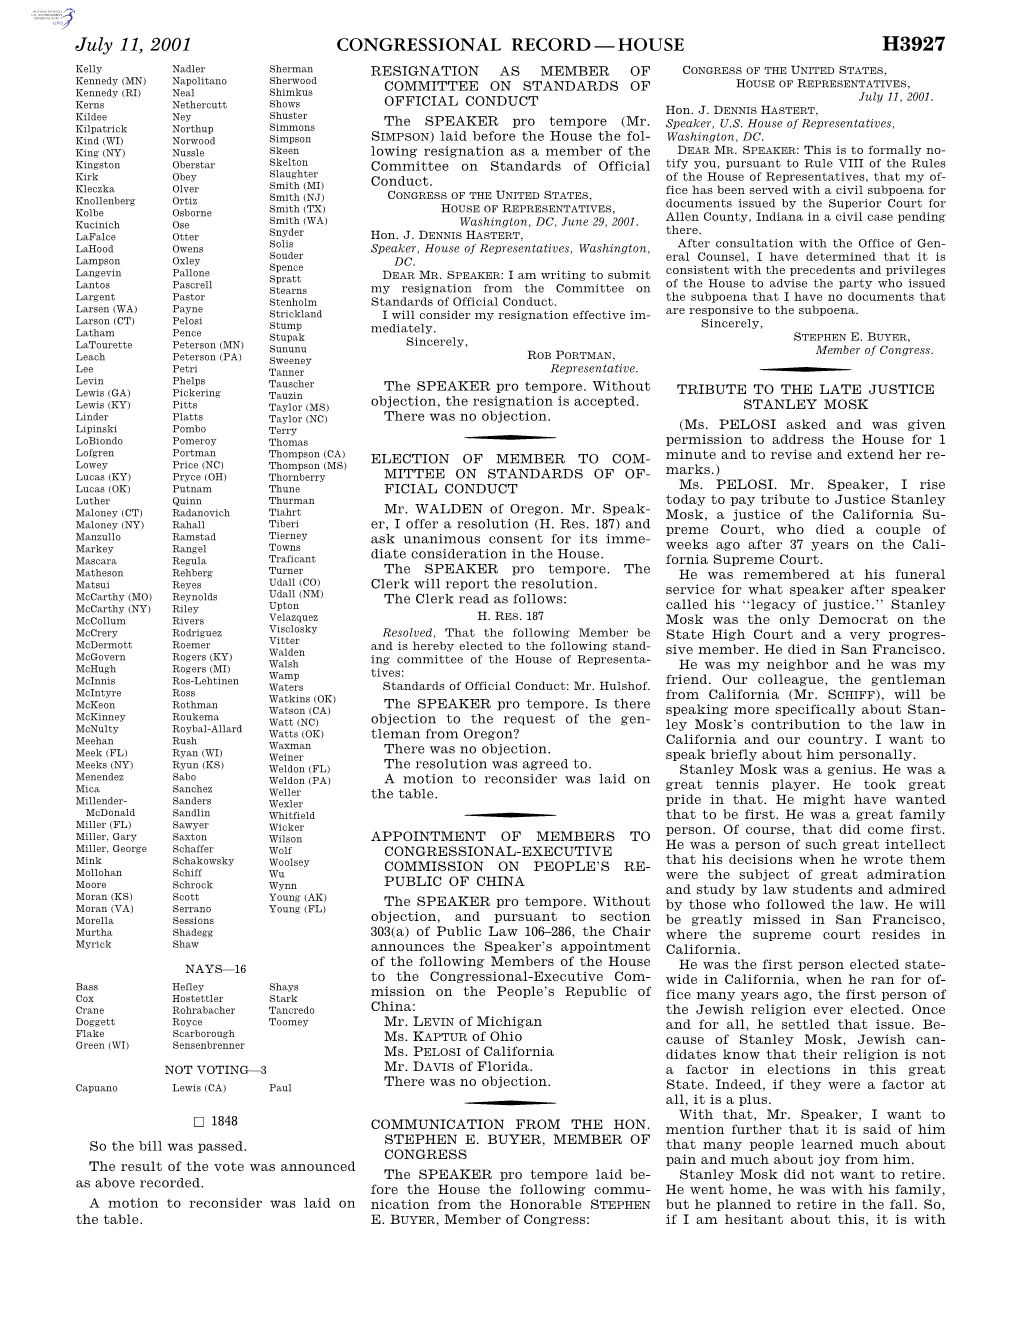 Congressional Record—House H3927